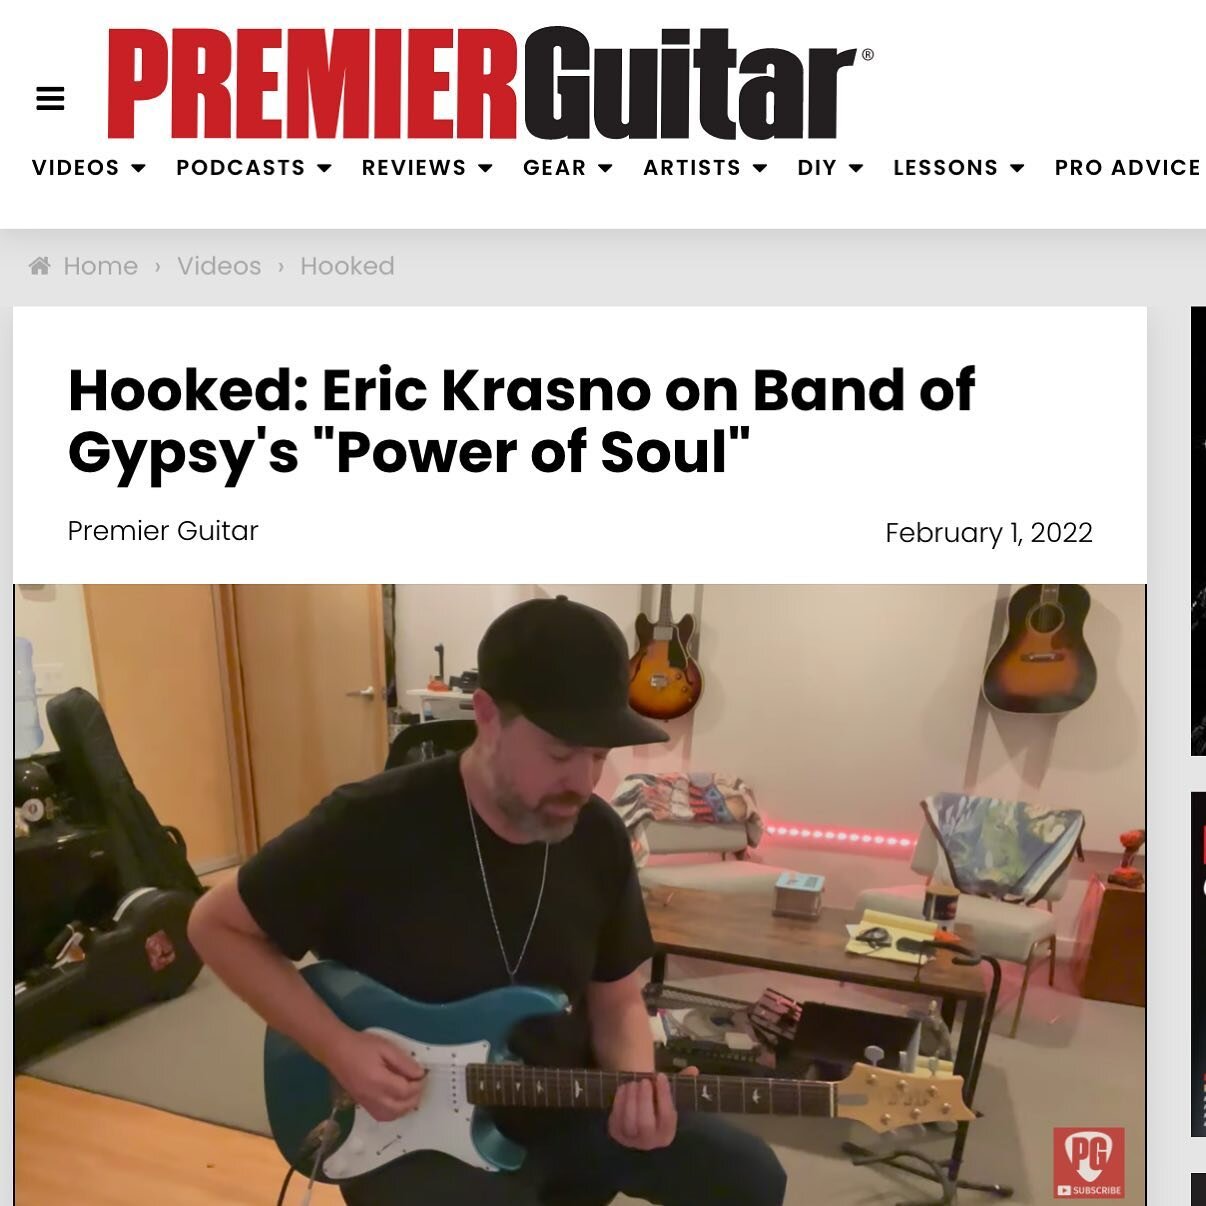 As he gears up to release his new solo album &lsquo;Always&rsquo; this Friday, GRAMMY winning guitarist @erickrasno spoke with @premierguitar about how @jimihendrix&rsquo;s ability to &quot;bend notes to a place you could never imagine&quot; drew him